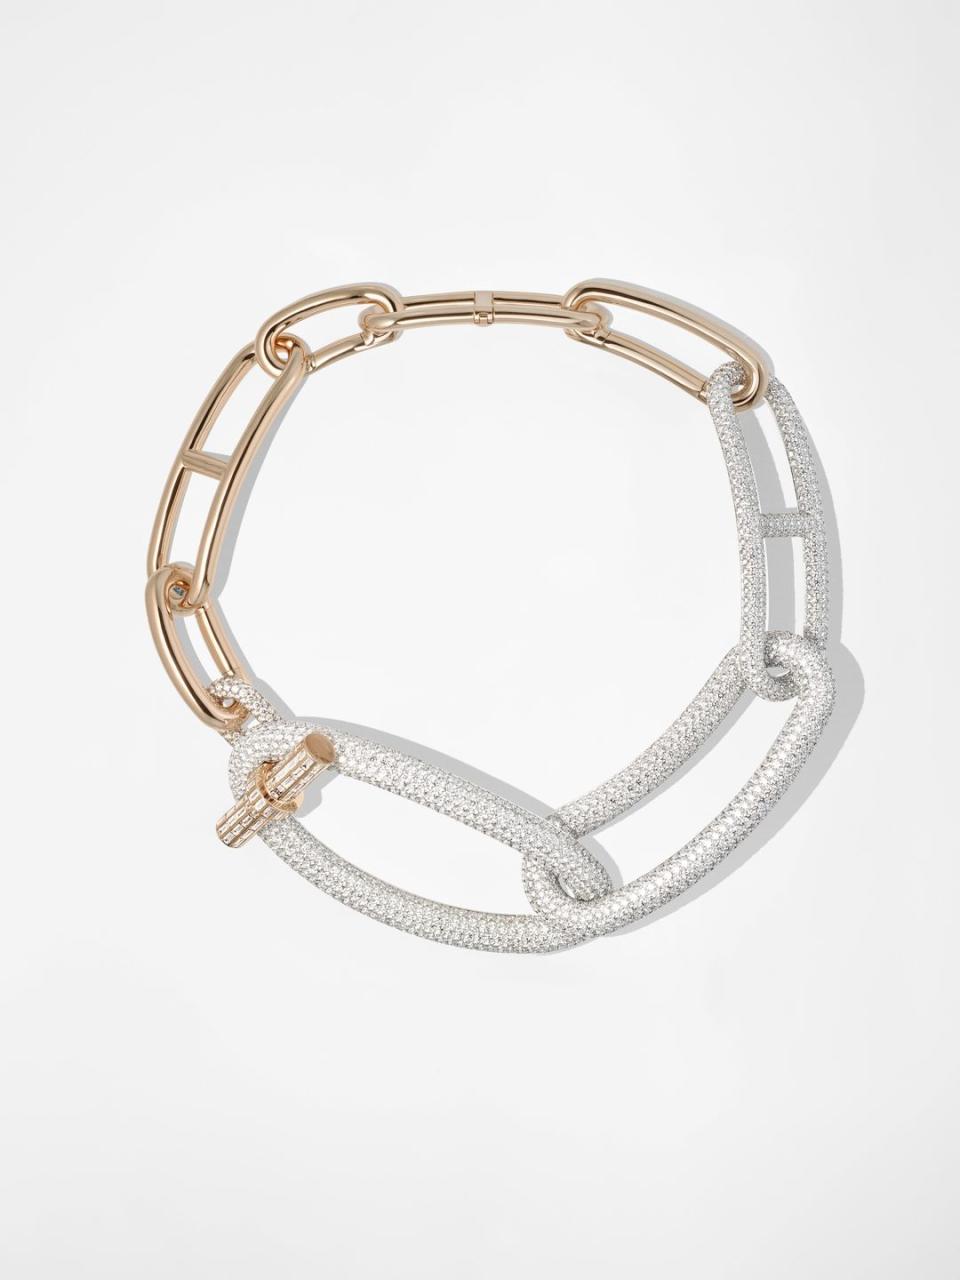 6) Hermès Adage Necklace, with white gold, rose gold, and diamonds